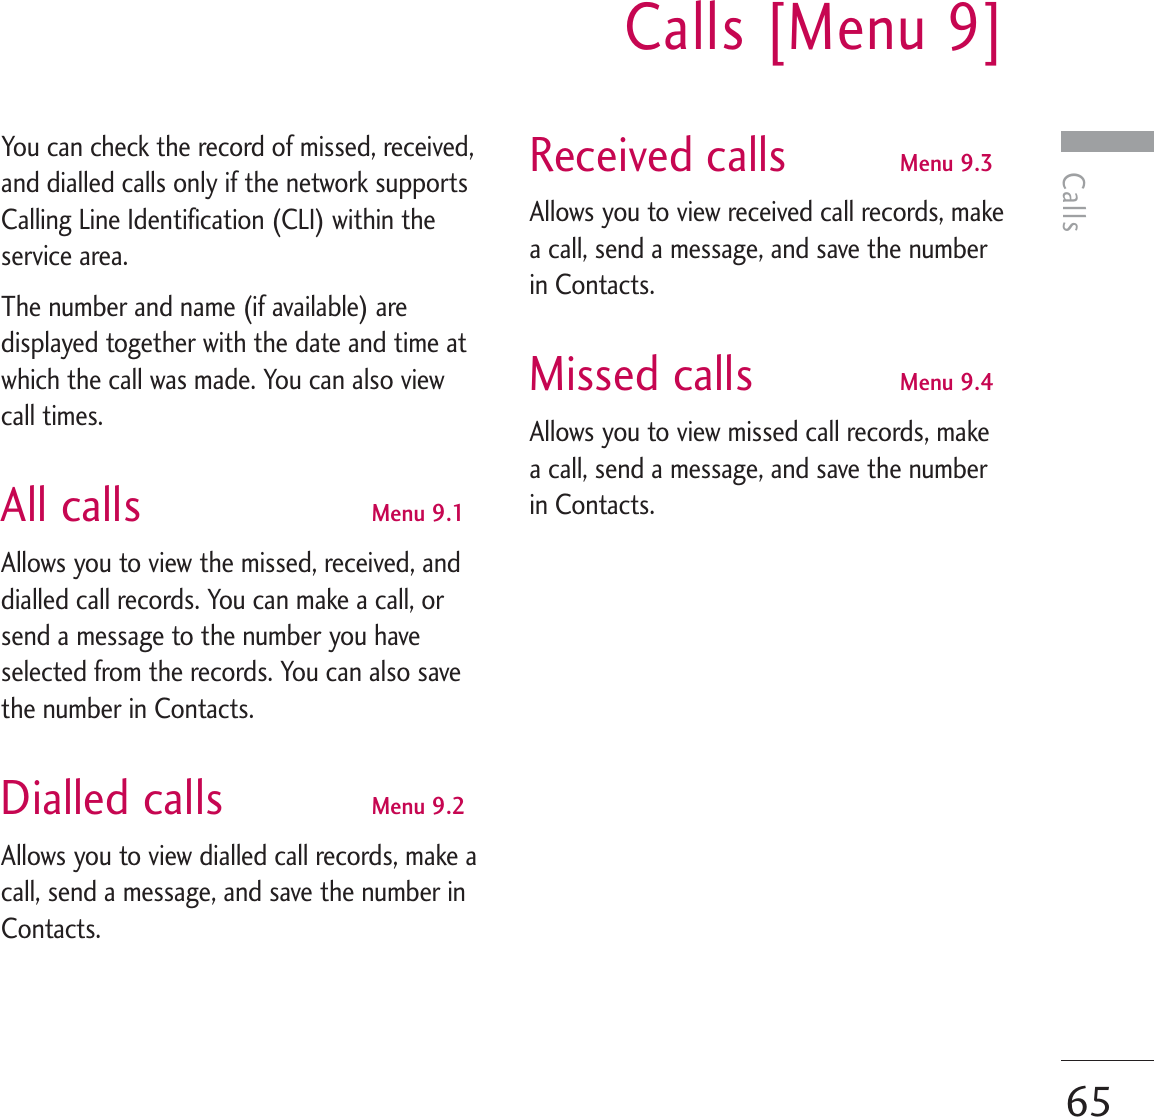 CallsCalls [Menu 9]65You can check the record of missed, received,and dialled calls only if the network supportsCalling Line Identification (CLI) within theservice area.The number and name (if available) aredisplayed together with the date and time atwhich the call was made. You can also viewcall times.All calls Menu 9.1Allows you to view the missed, received, anddialled call records. You can make a call, orsend a message to the number you haveselected from the records. You can also savethe number in Contacts.Dialled calls Menu 9.2Allows you to view dialled call records, make acall, send a message, and save the number inContacts.Received calls Menu 9.3Allows you to view received call records, makea call, send a message, and save the numberin Contacts.Missed calls Menu 9.4Allows you to view missed call records, makea call, send a message, and save the numberin Contacts.